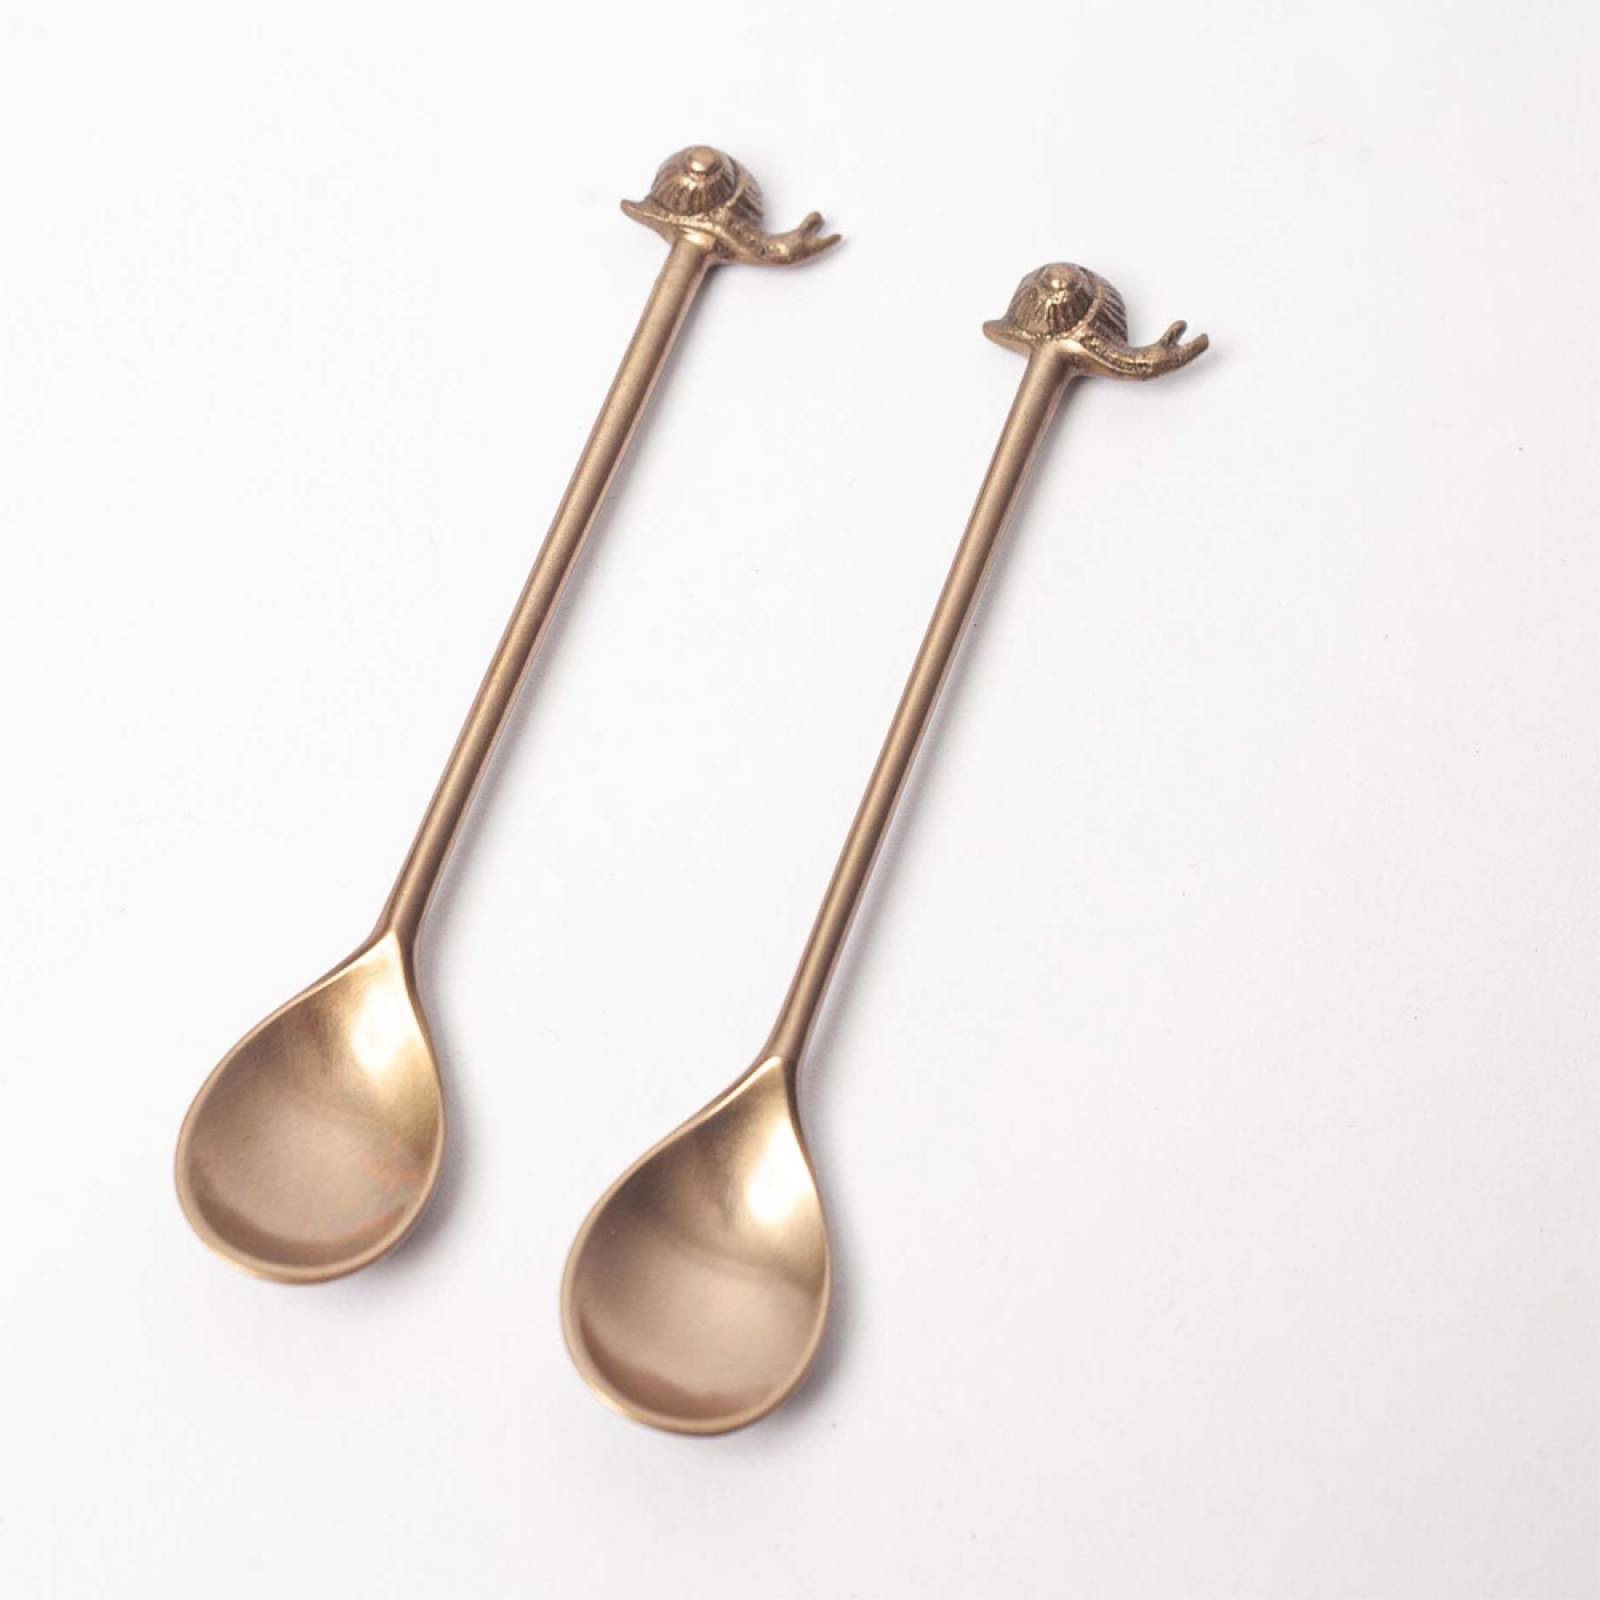 Boxed Set Of 2 Antiqued Brass Snail Spoons